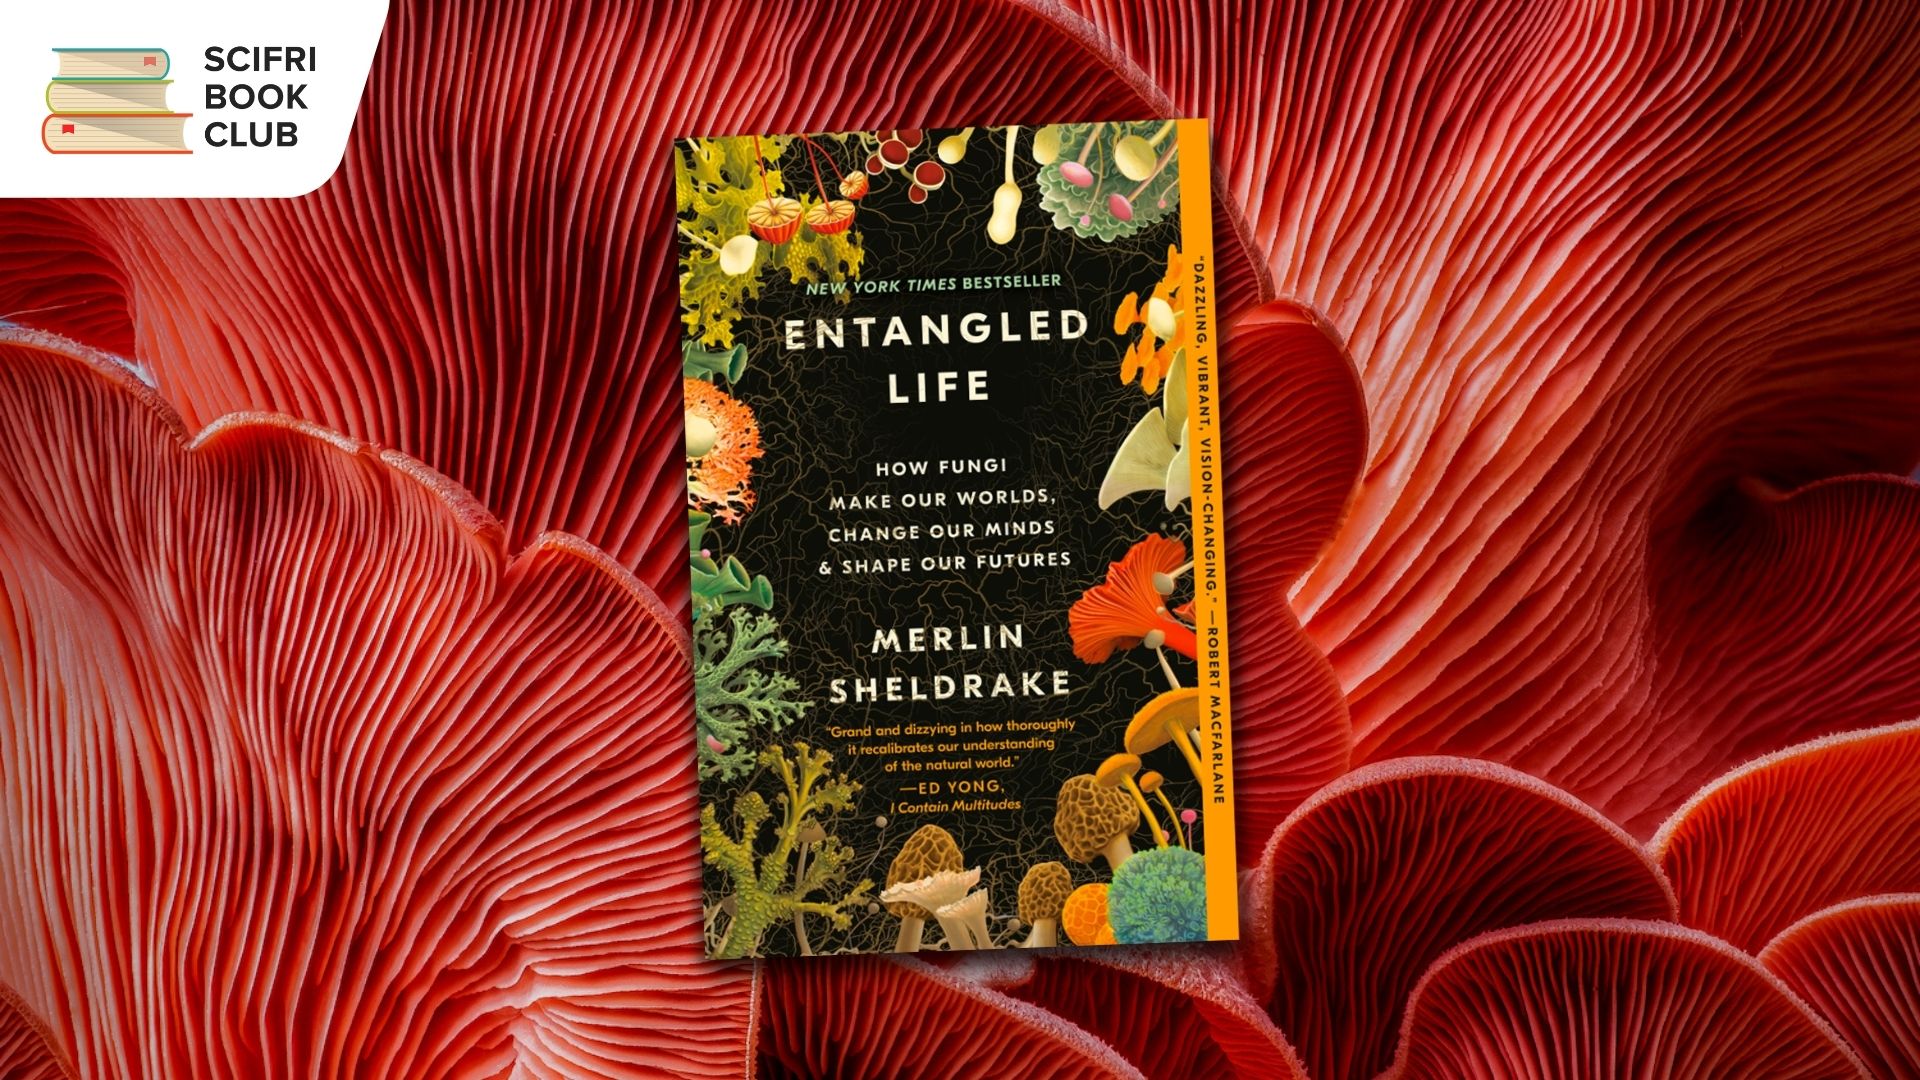 The book cover of ENTANGLED LIFE by Merlin Sheldrake with a background featuring the gills of a bright red mushroom. The logo for the SciFri Book Club is in the top left corner.